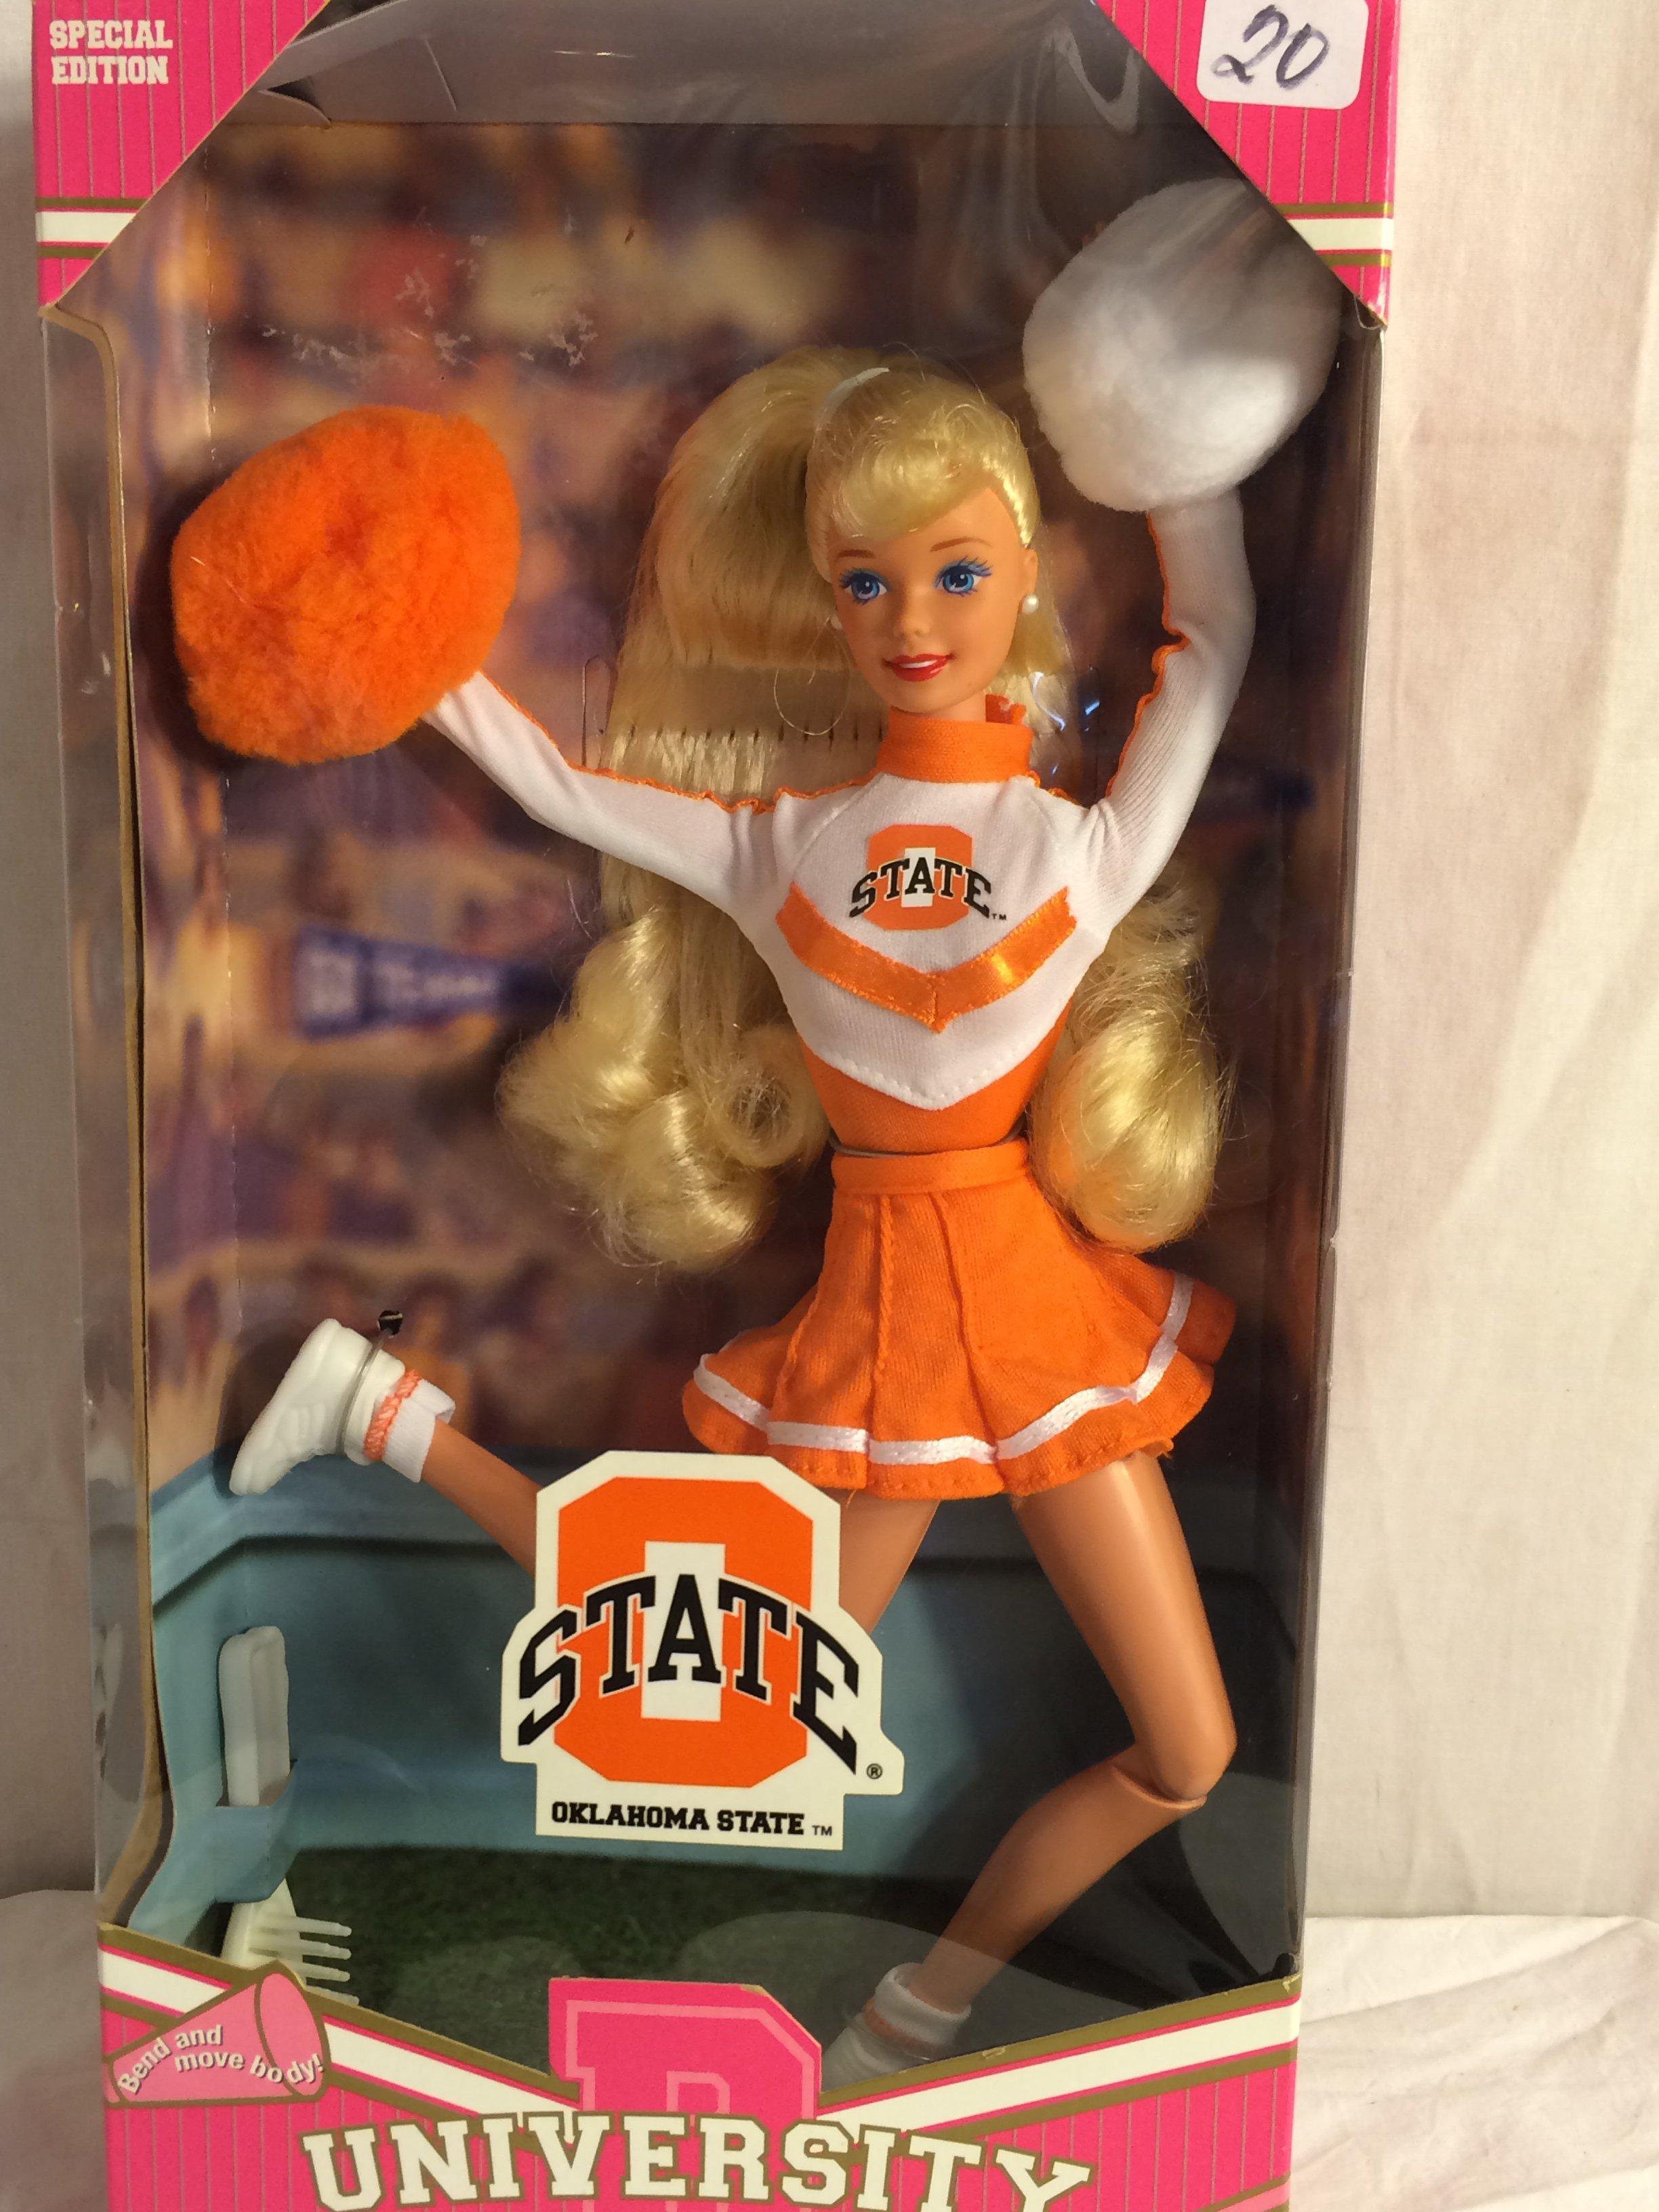 Collector Mattel Barbie Doll Oklahoma State University Barbie Doll 12.3/4" Tall By 6.5"Width Box